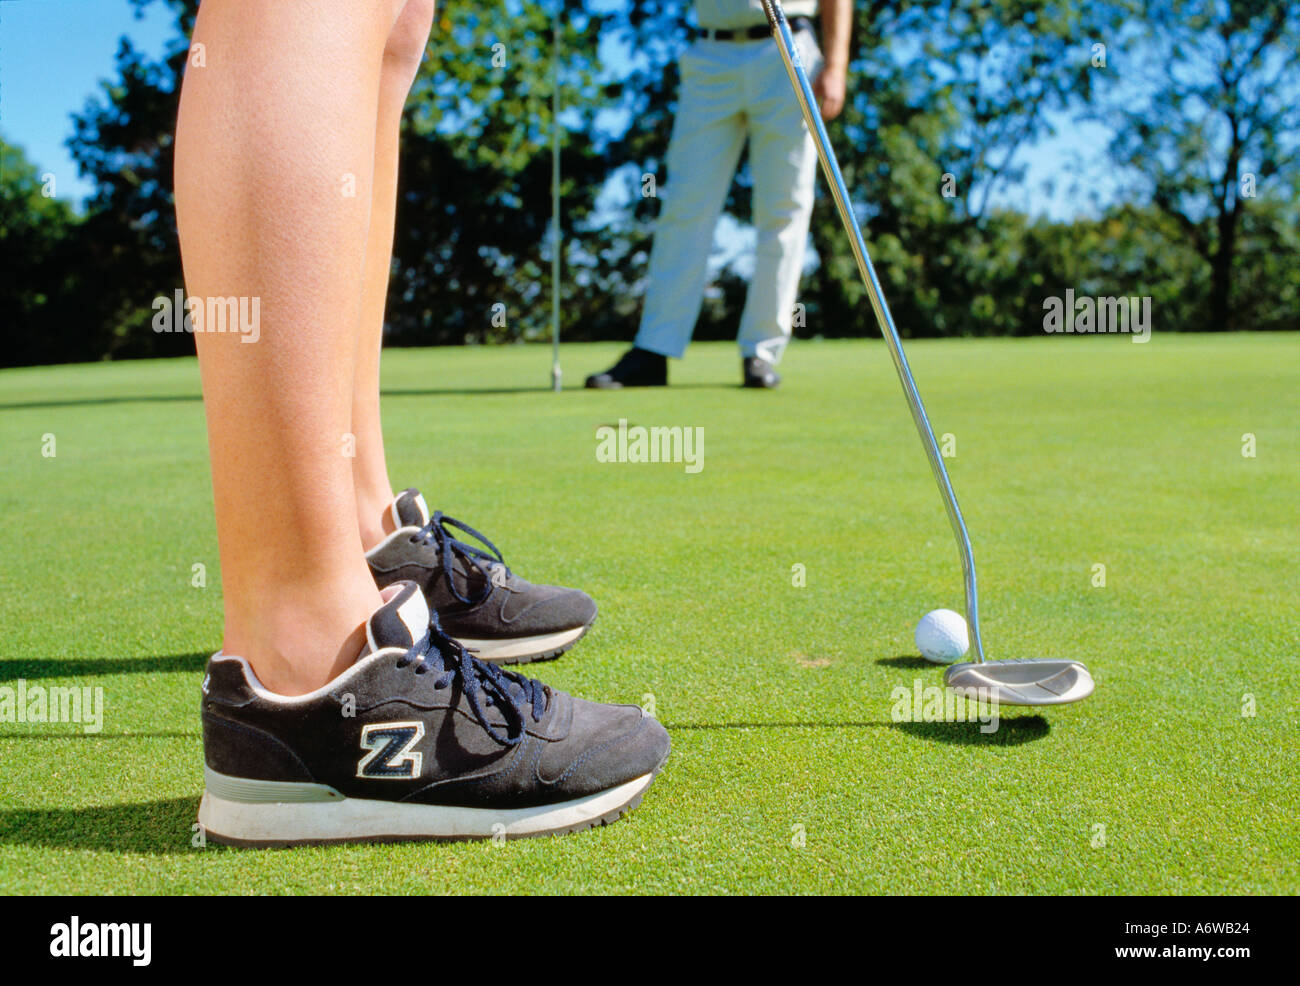 Feet of young female golfer in foreground making a putting shot Stock Photo